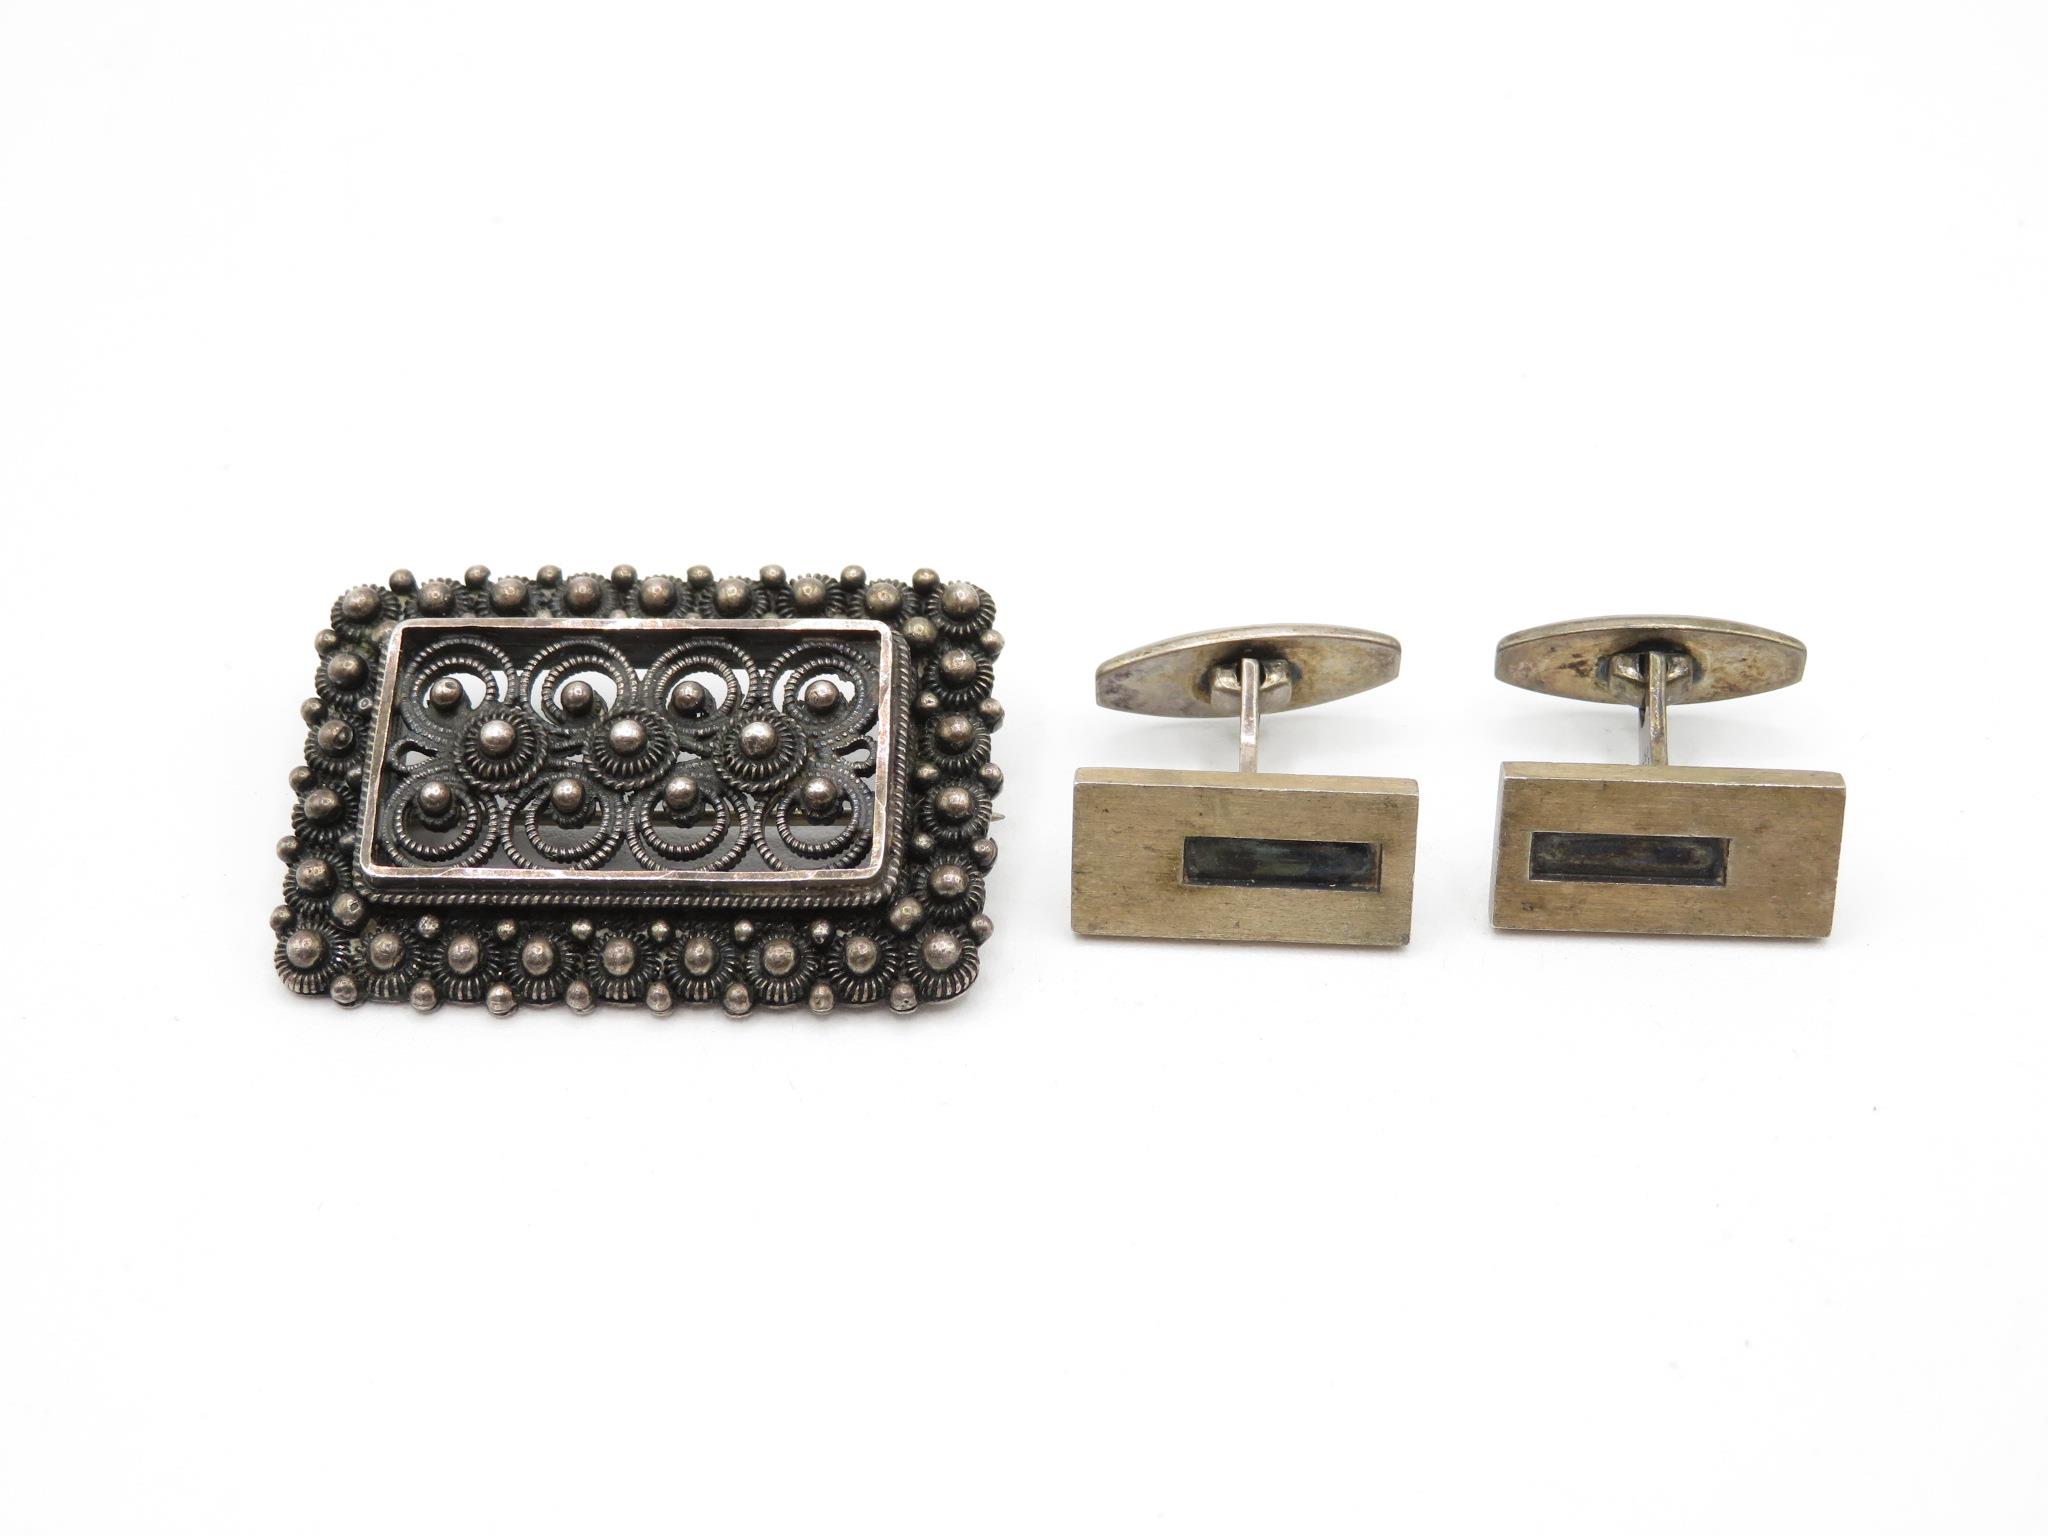 A Silver Scandinavian Silver Brooch And A Pair Of Cufflinks By N.E.From (38g)